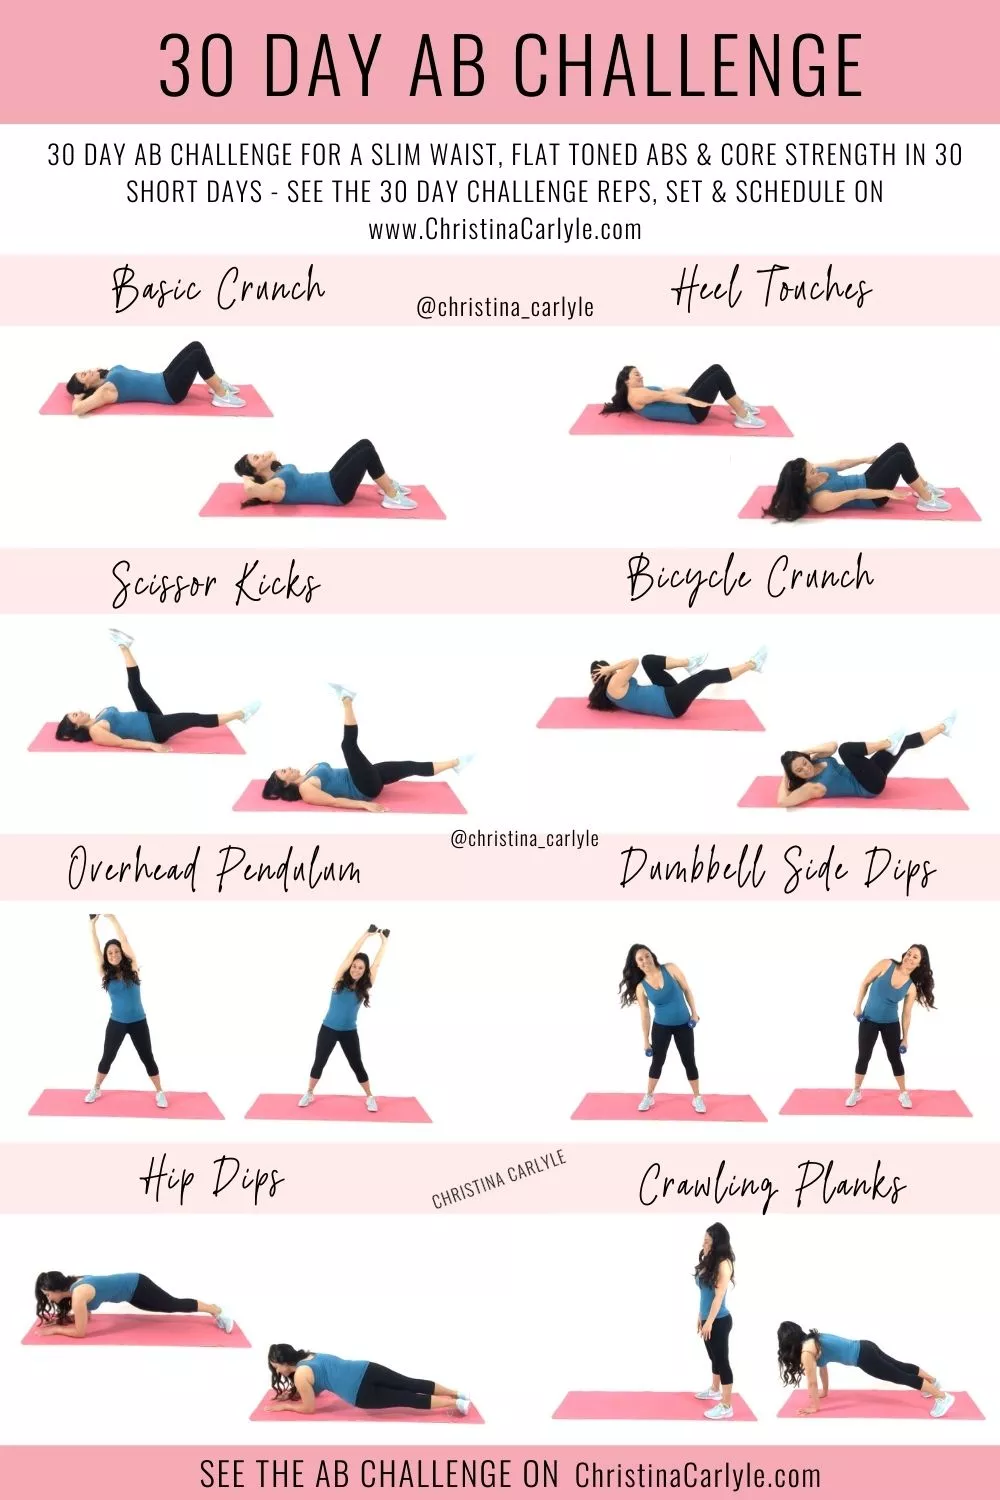 30 Ab Challenge for Flat, Toned Abs, and Core Strength in 4 weeks